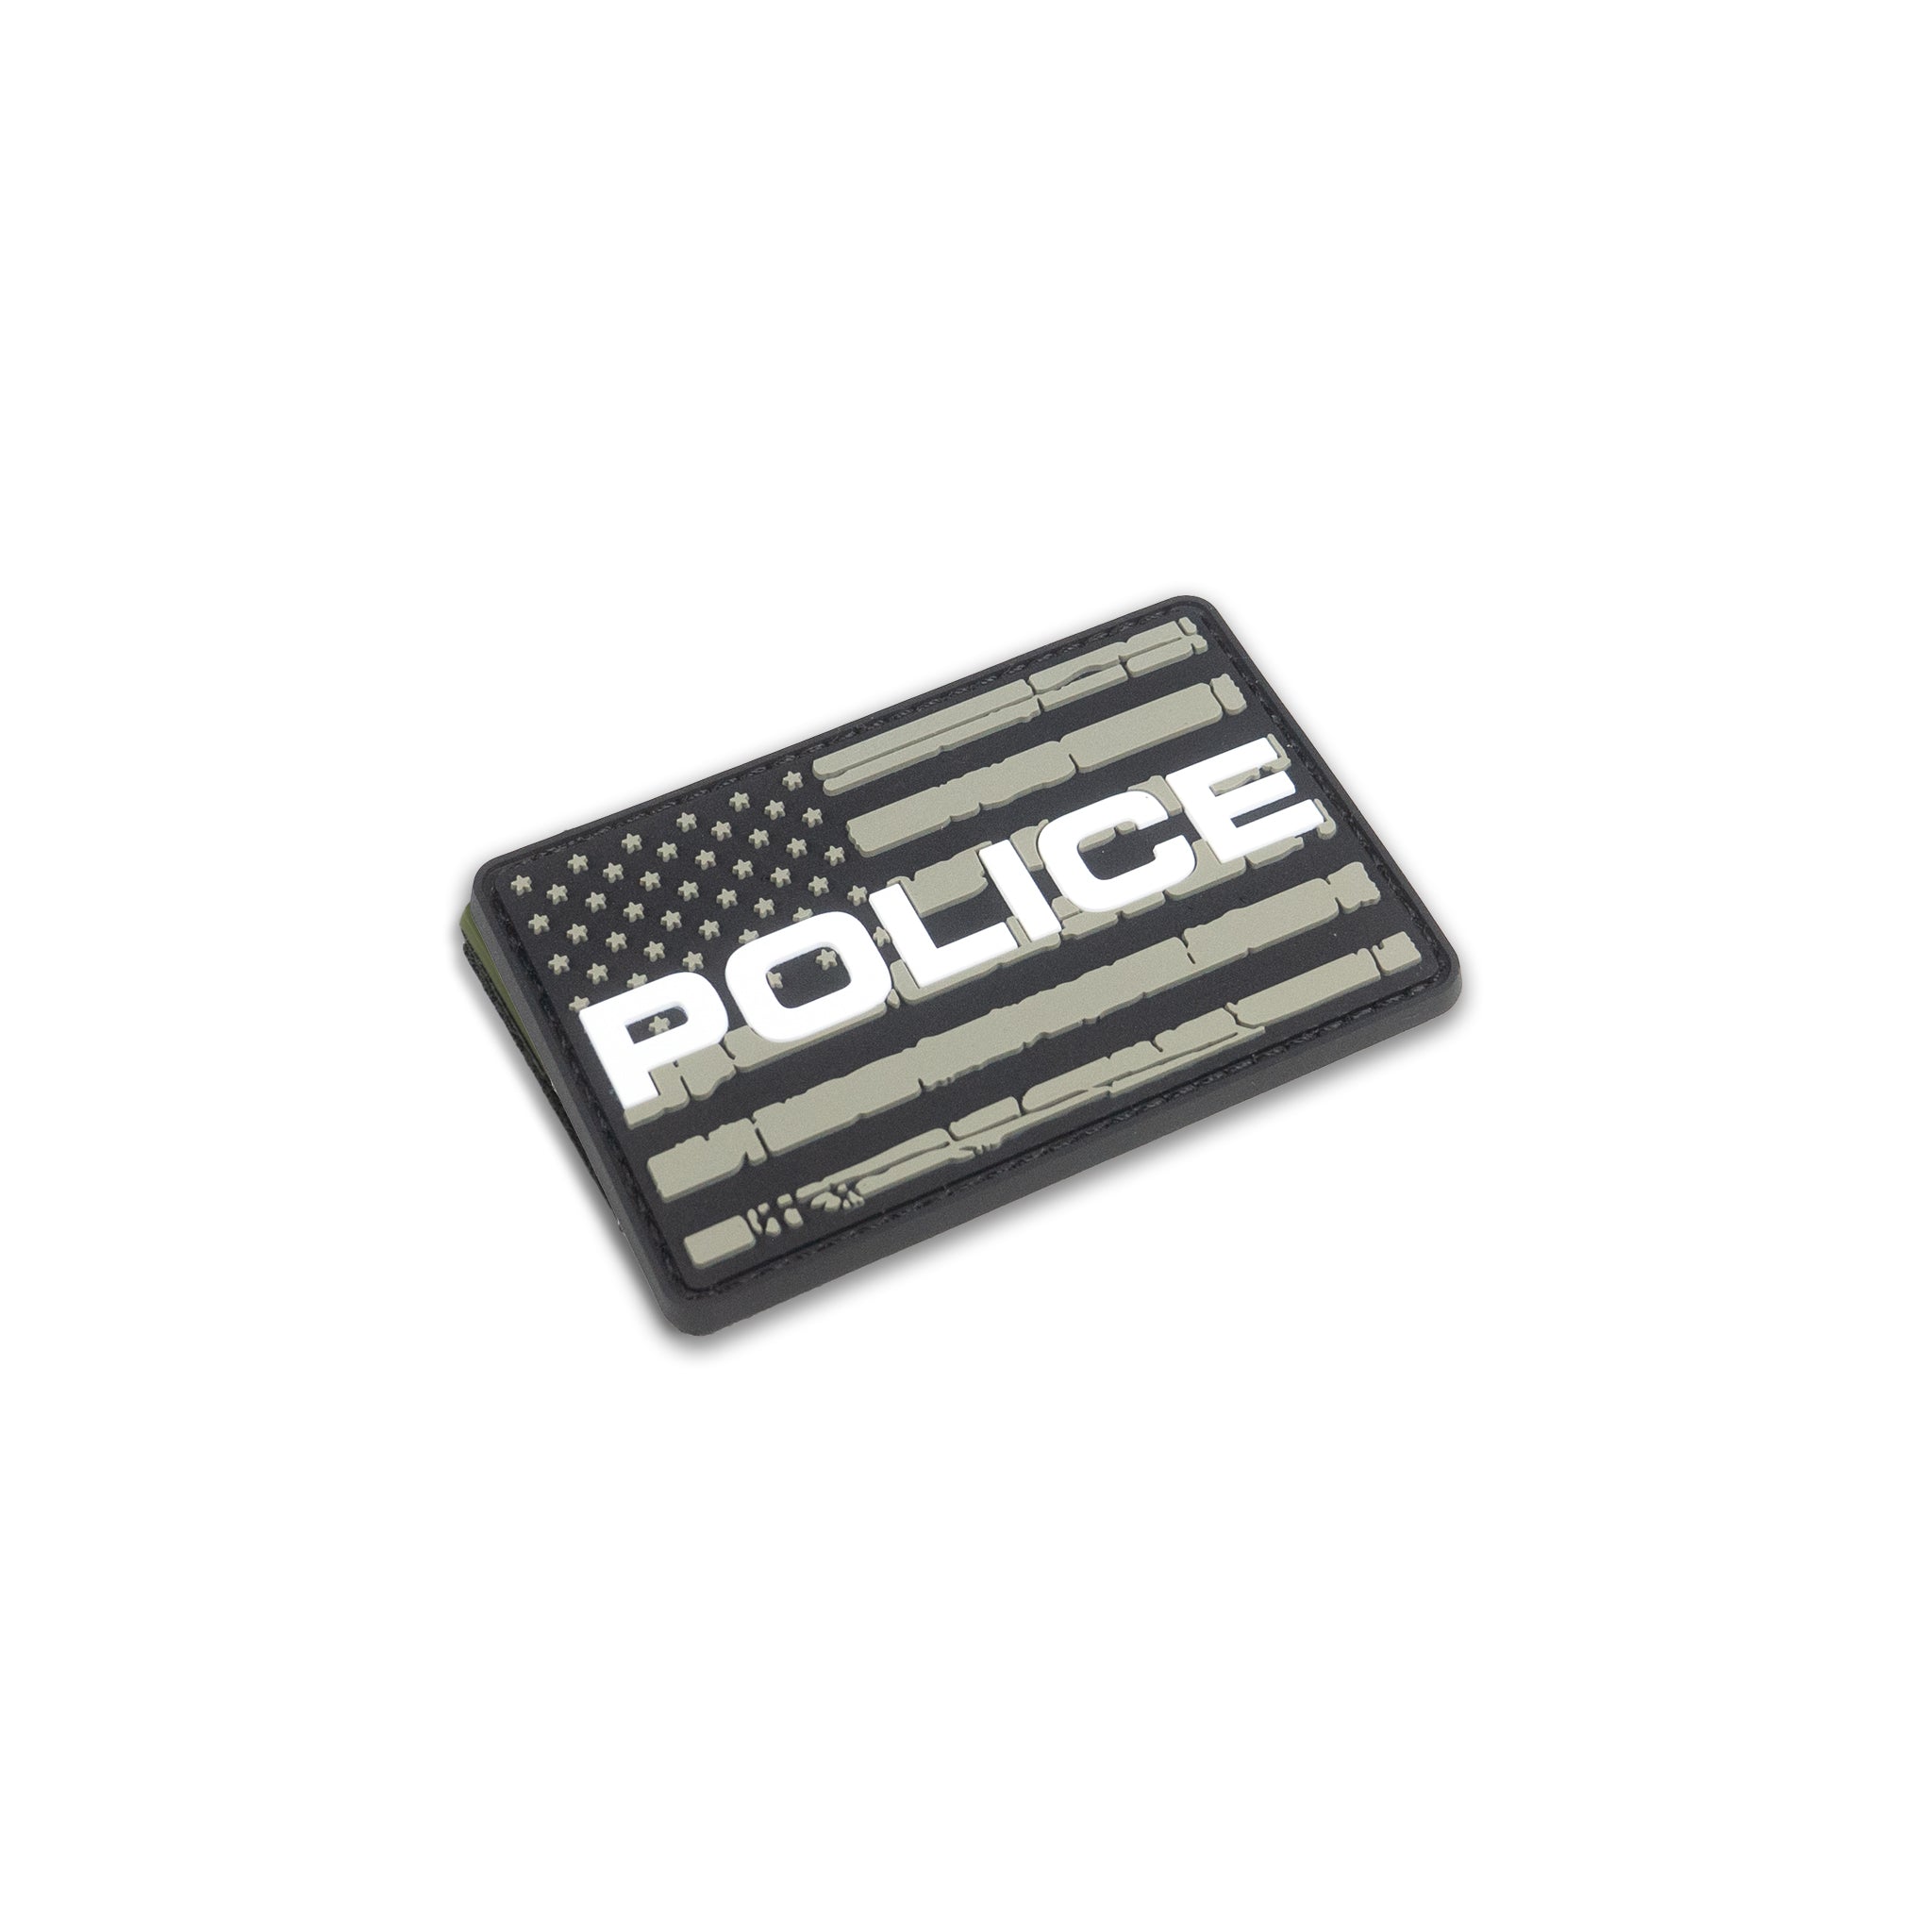 911 Dispatcher Subdued USA Flag and Skull Embroidered Hook and